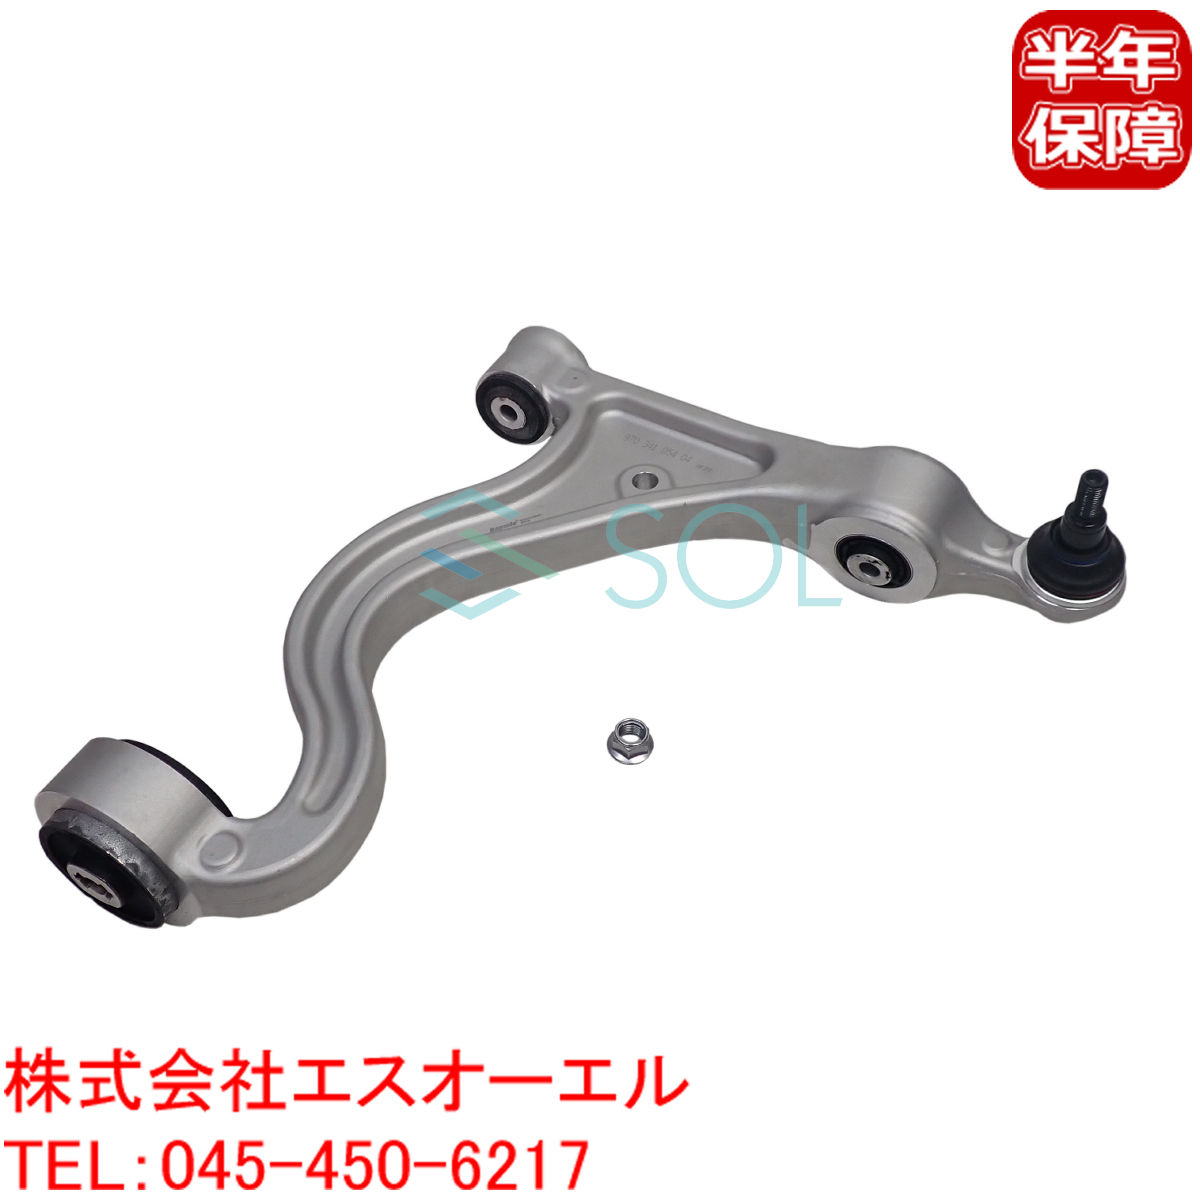  Porsche Panamera 970 front lower arm control arm nut attaching right side 97034105404 shipping deadline 18 hour 